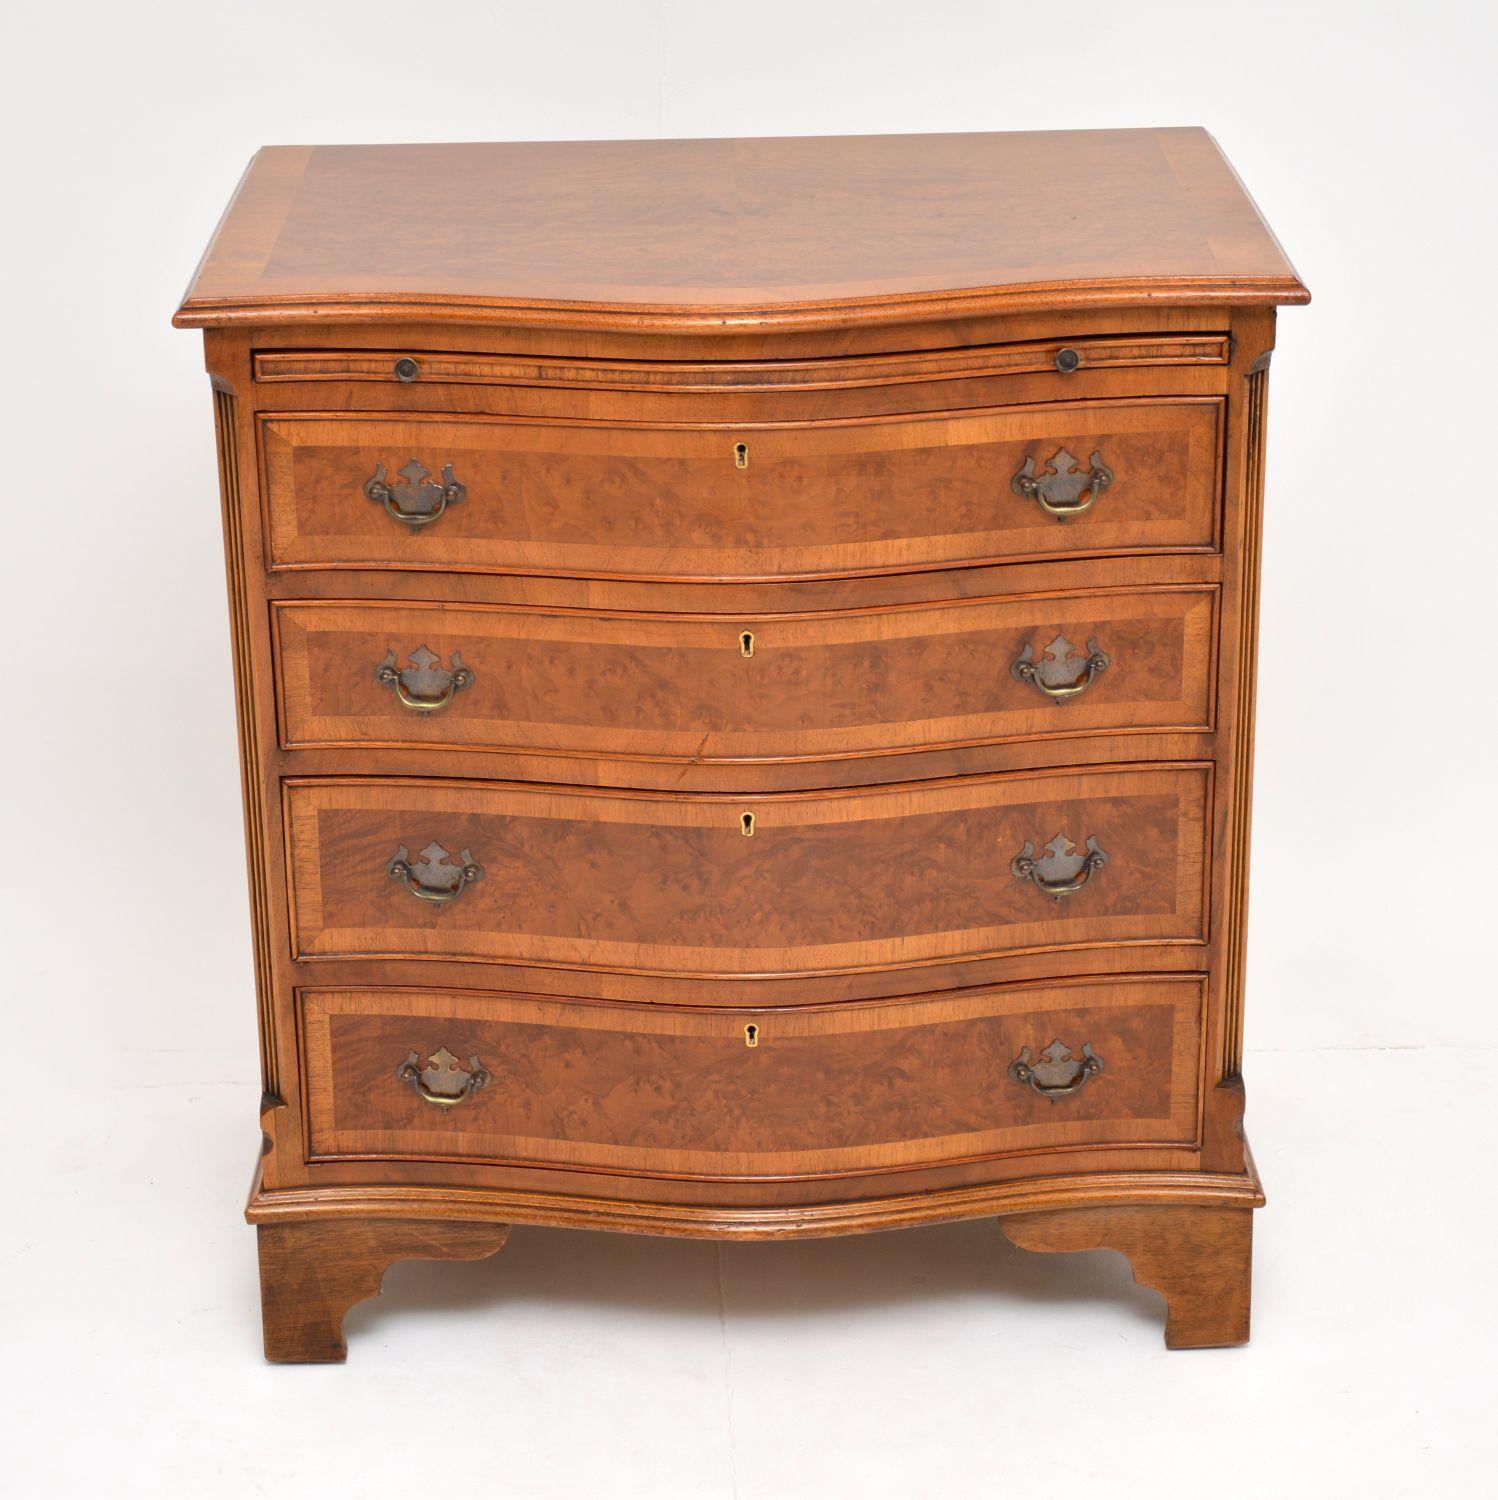 Antique walnut George III style serpentine shaped chest of drawers in excellent condition & dating from the 1930s period.

The top & the drawer fronts are burr walnut with figured walnut cross bandings. There is a brushing slide above the four